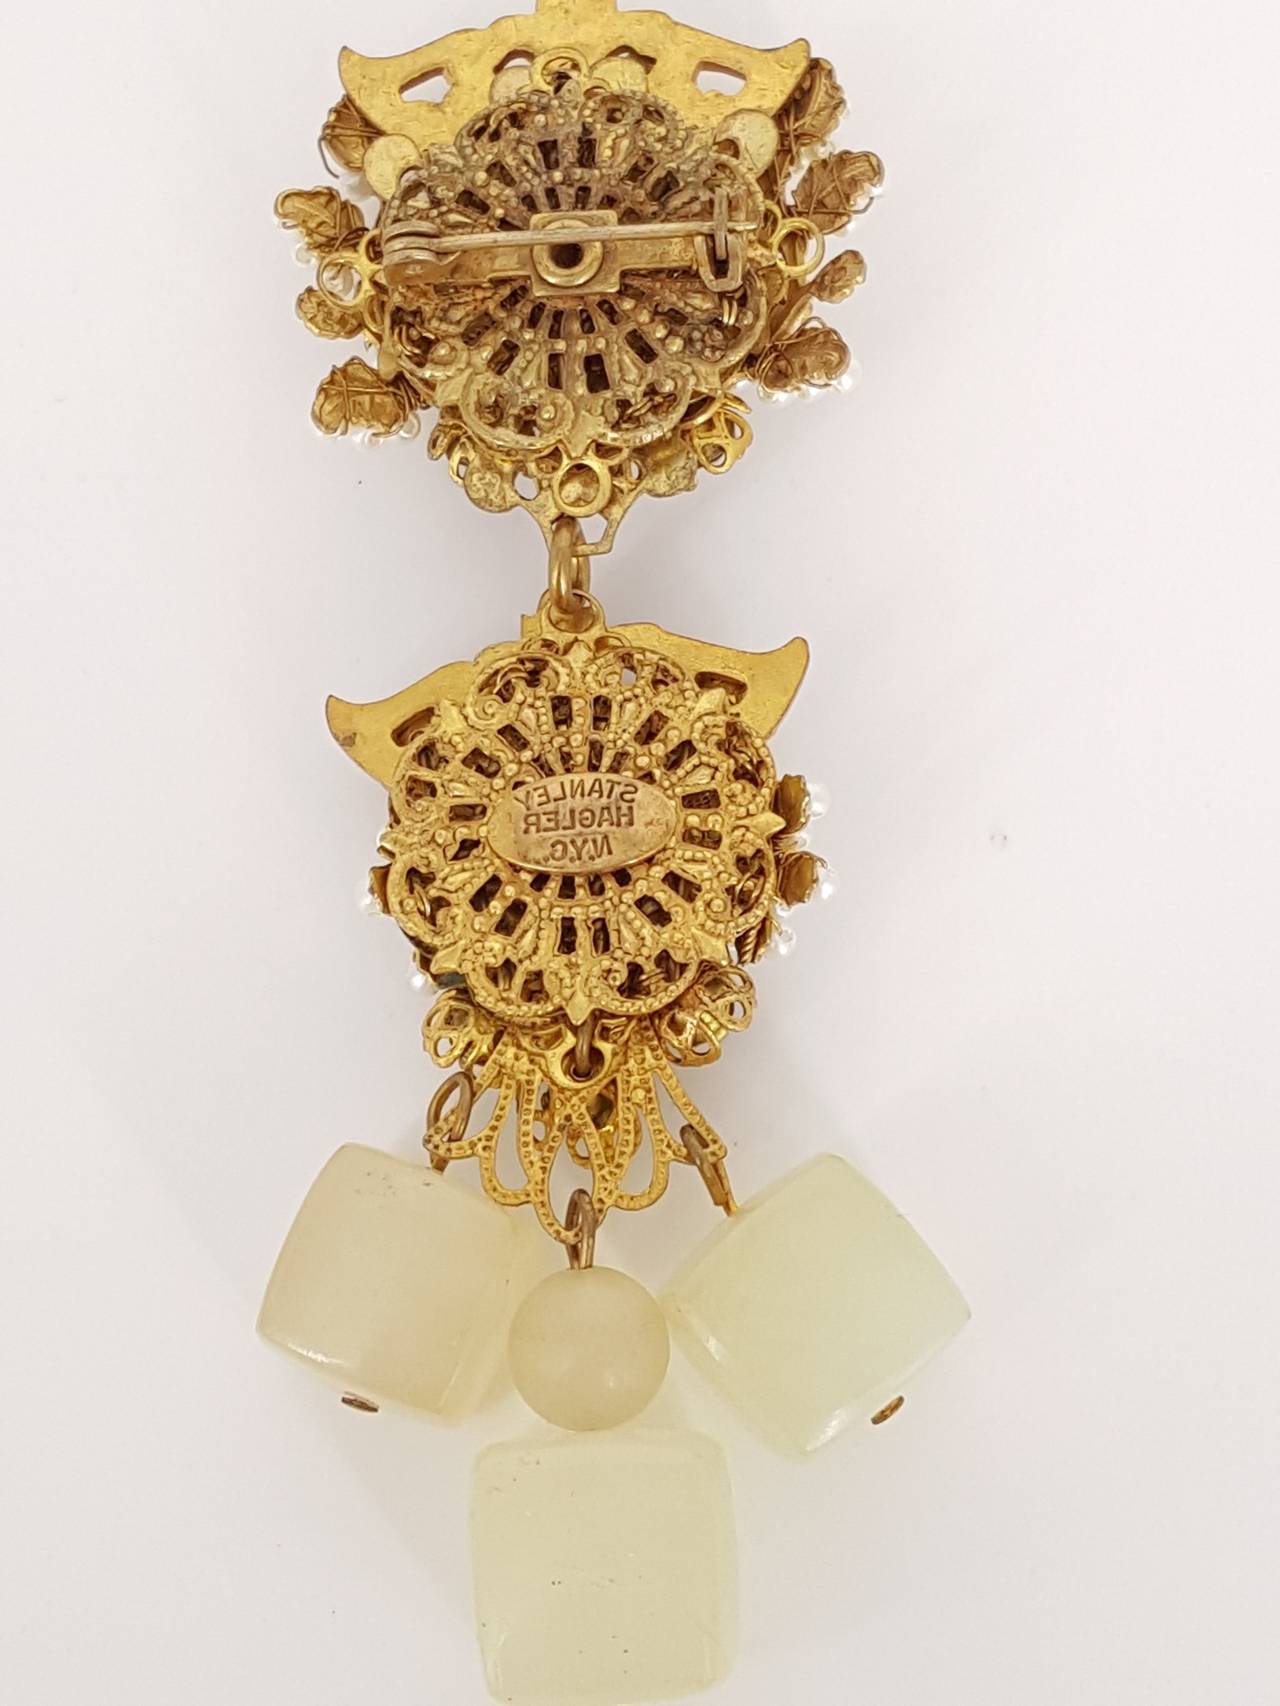 Offered for sale is this lovely Stanley Hagler of N.Y. hanging brooch.  The workmanship is gorgeous.  This is a 2 tier brooch with hanging Lucite squares that move.  The upper portion has a large soft green cabochon stone surrounded by filigree,